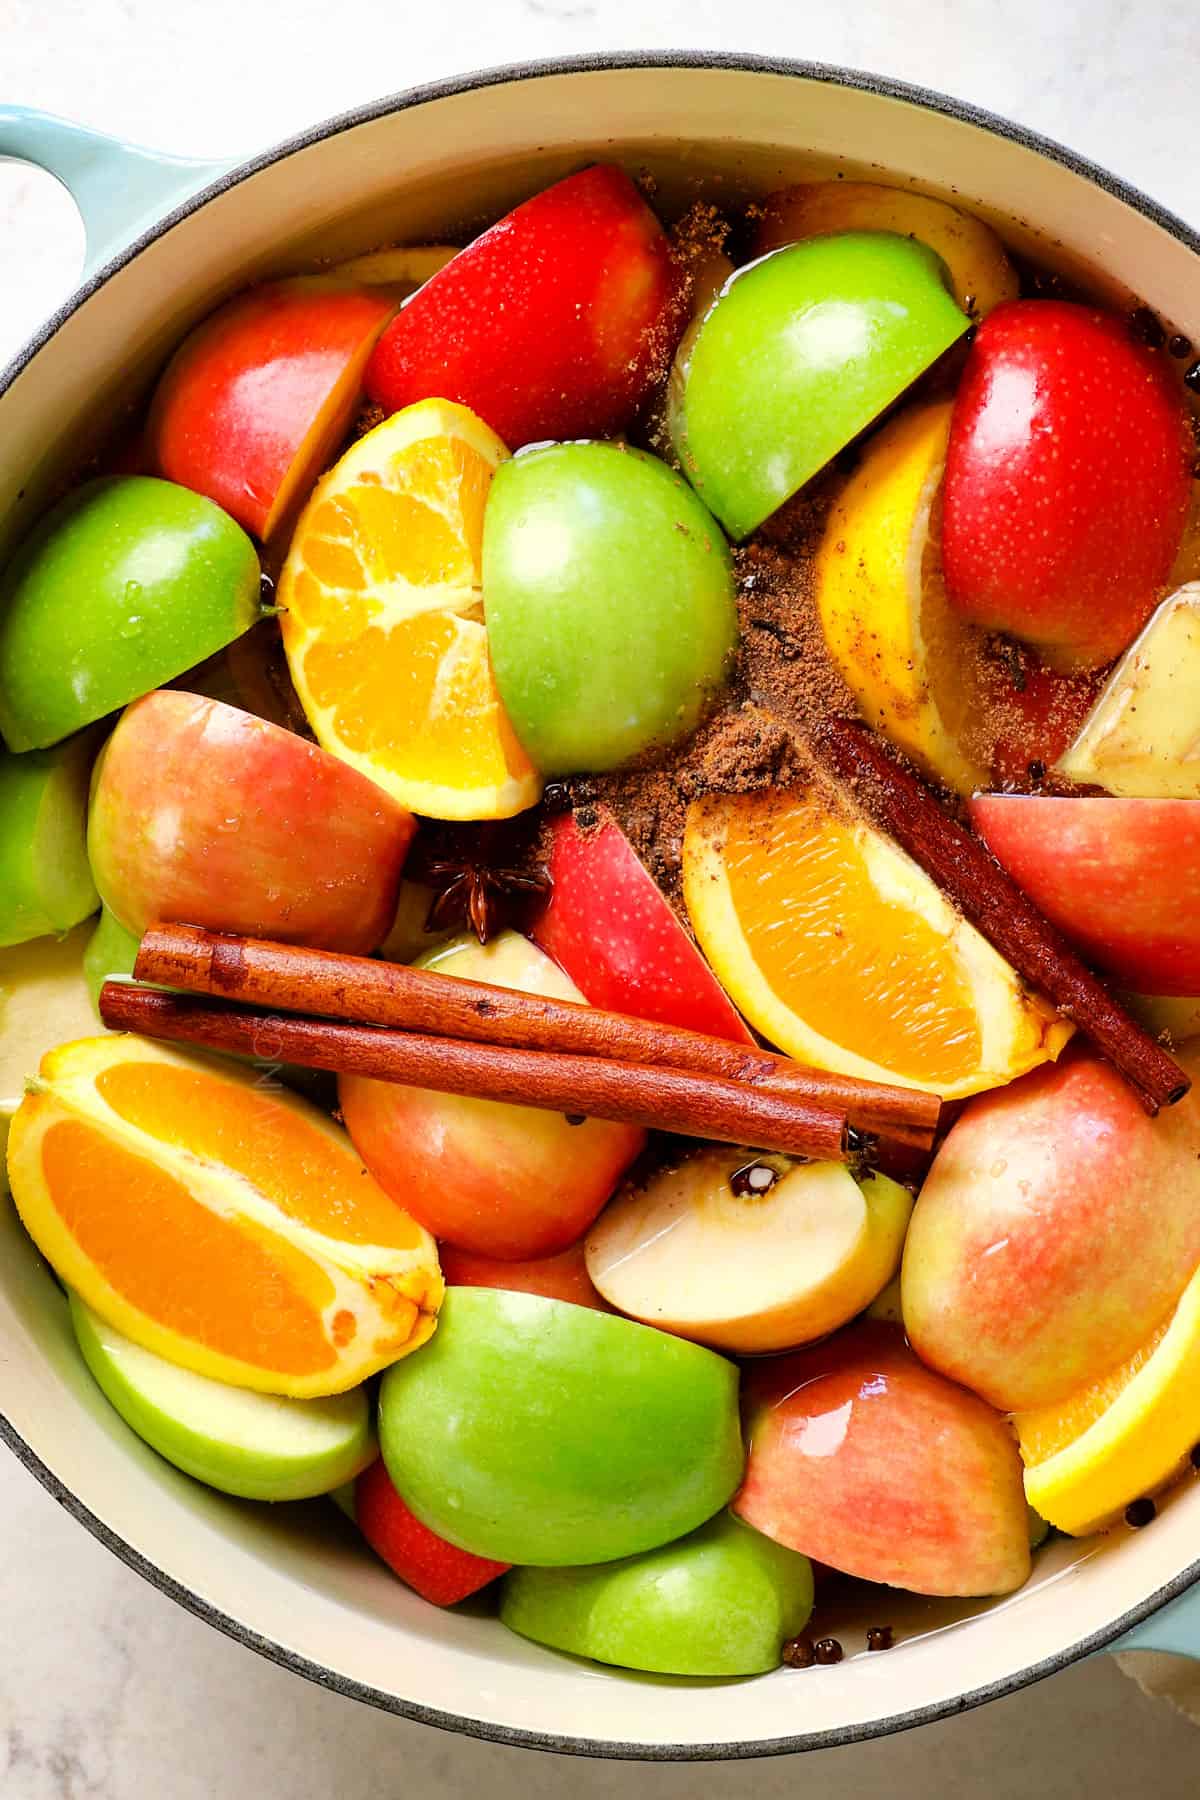 showing how to make apple cider recipe by adding apples, oranges, cinnamon, cloves, ginger and water to a large pot